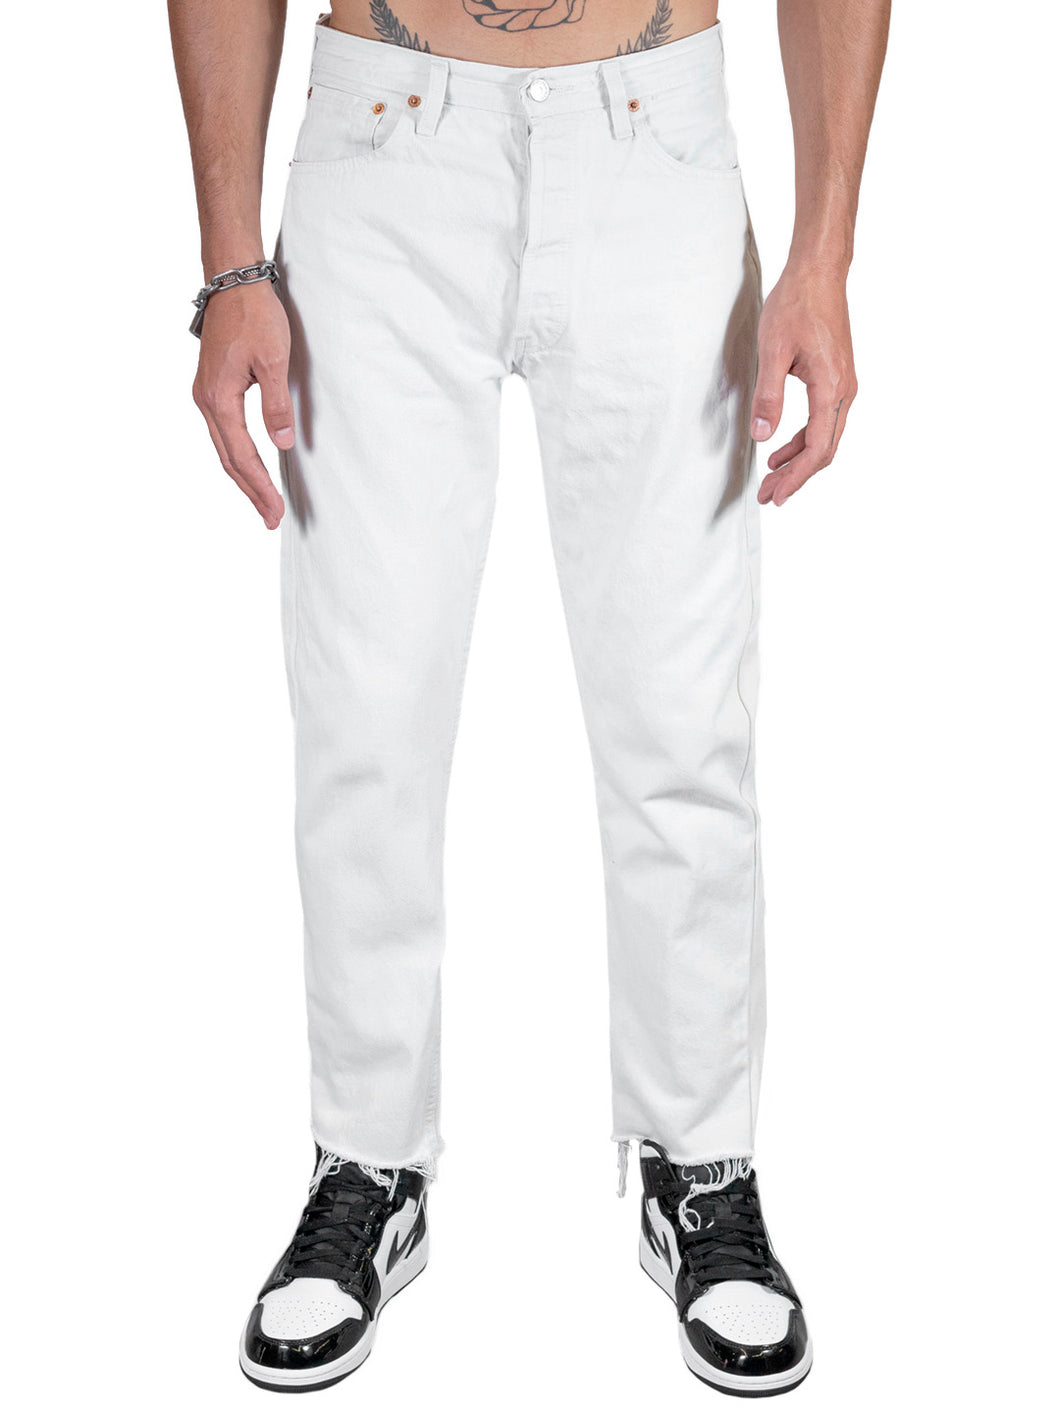 LEVI'S 501 Man Jeans Revisited White Washed